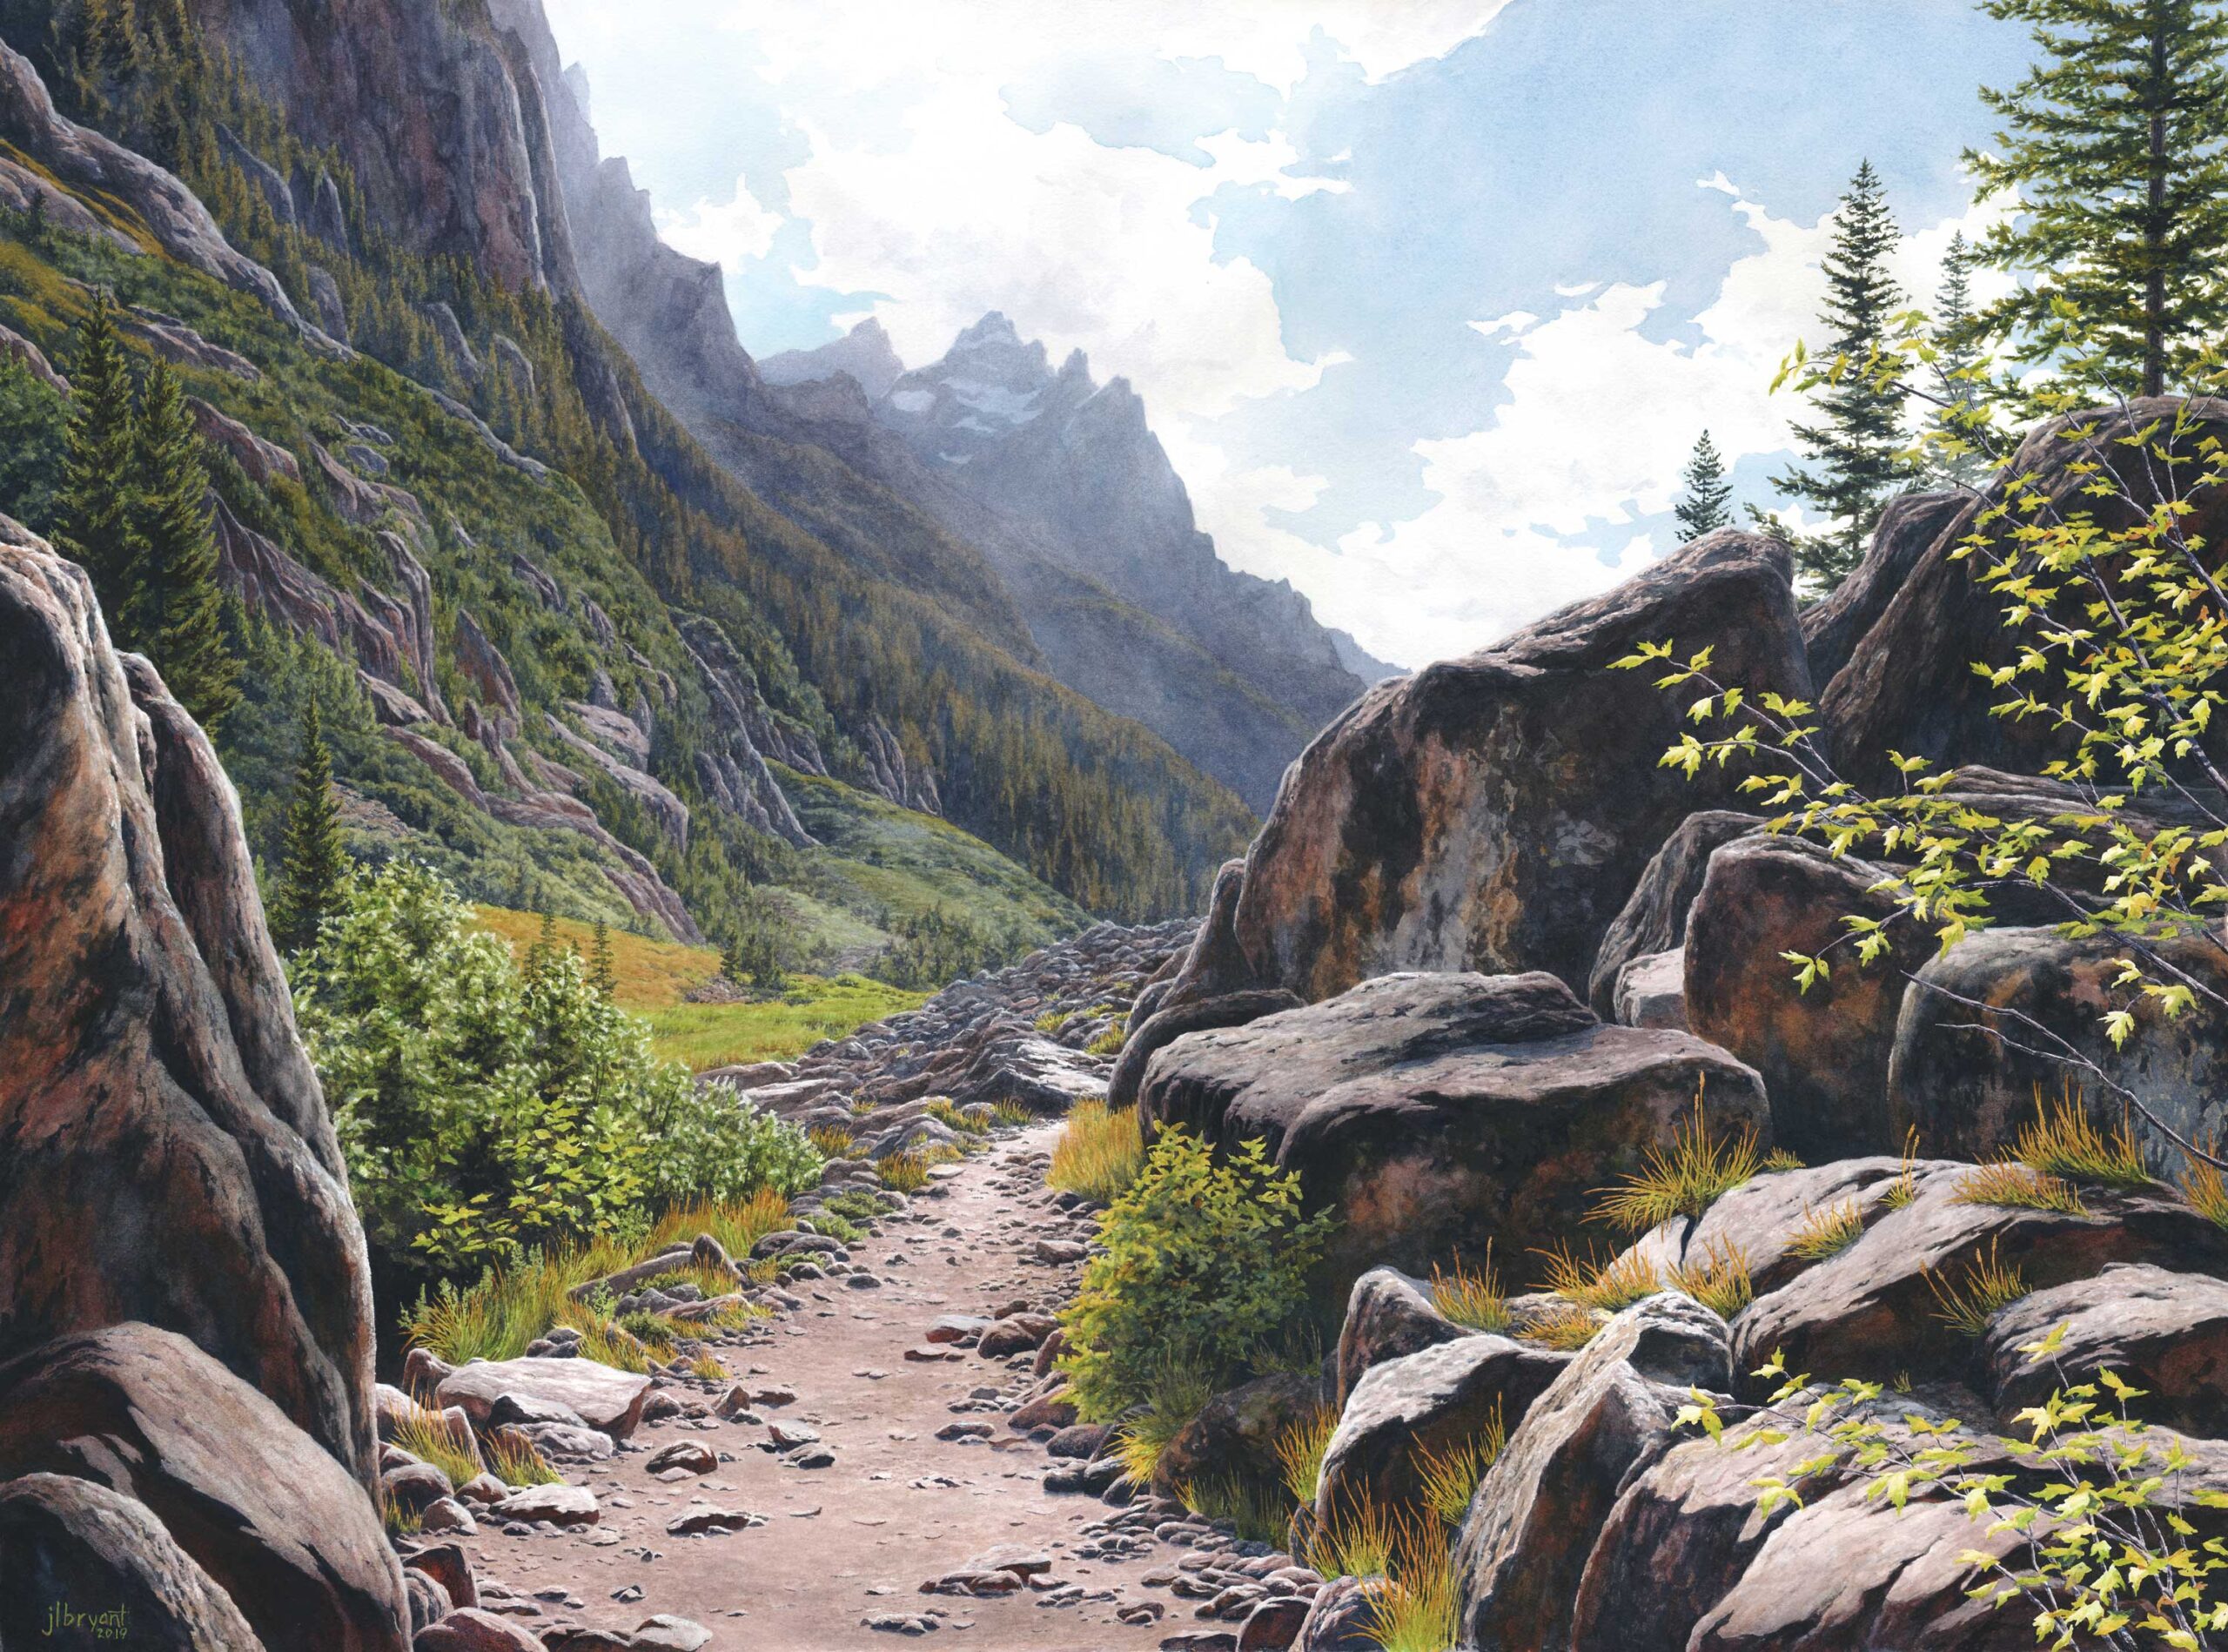 Jessica L. Bryant, "Cascade Canyon," 2020, watercolor, 22 x 30 in., courtesy of The Art Spirit Gallery of Fine Art, Coeur d’Alene, Idaho, studio from plein air study